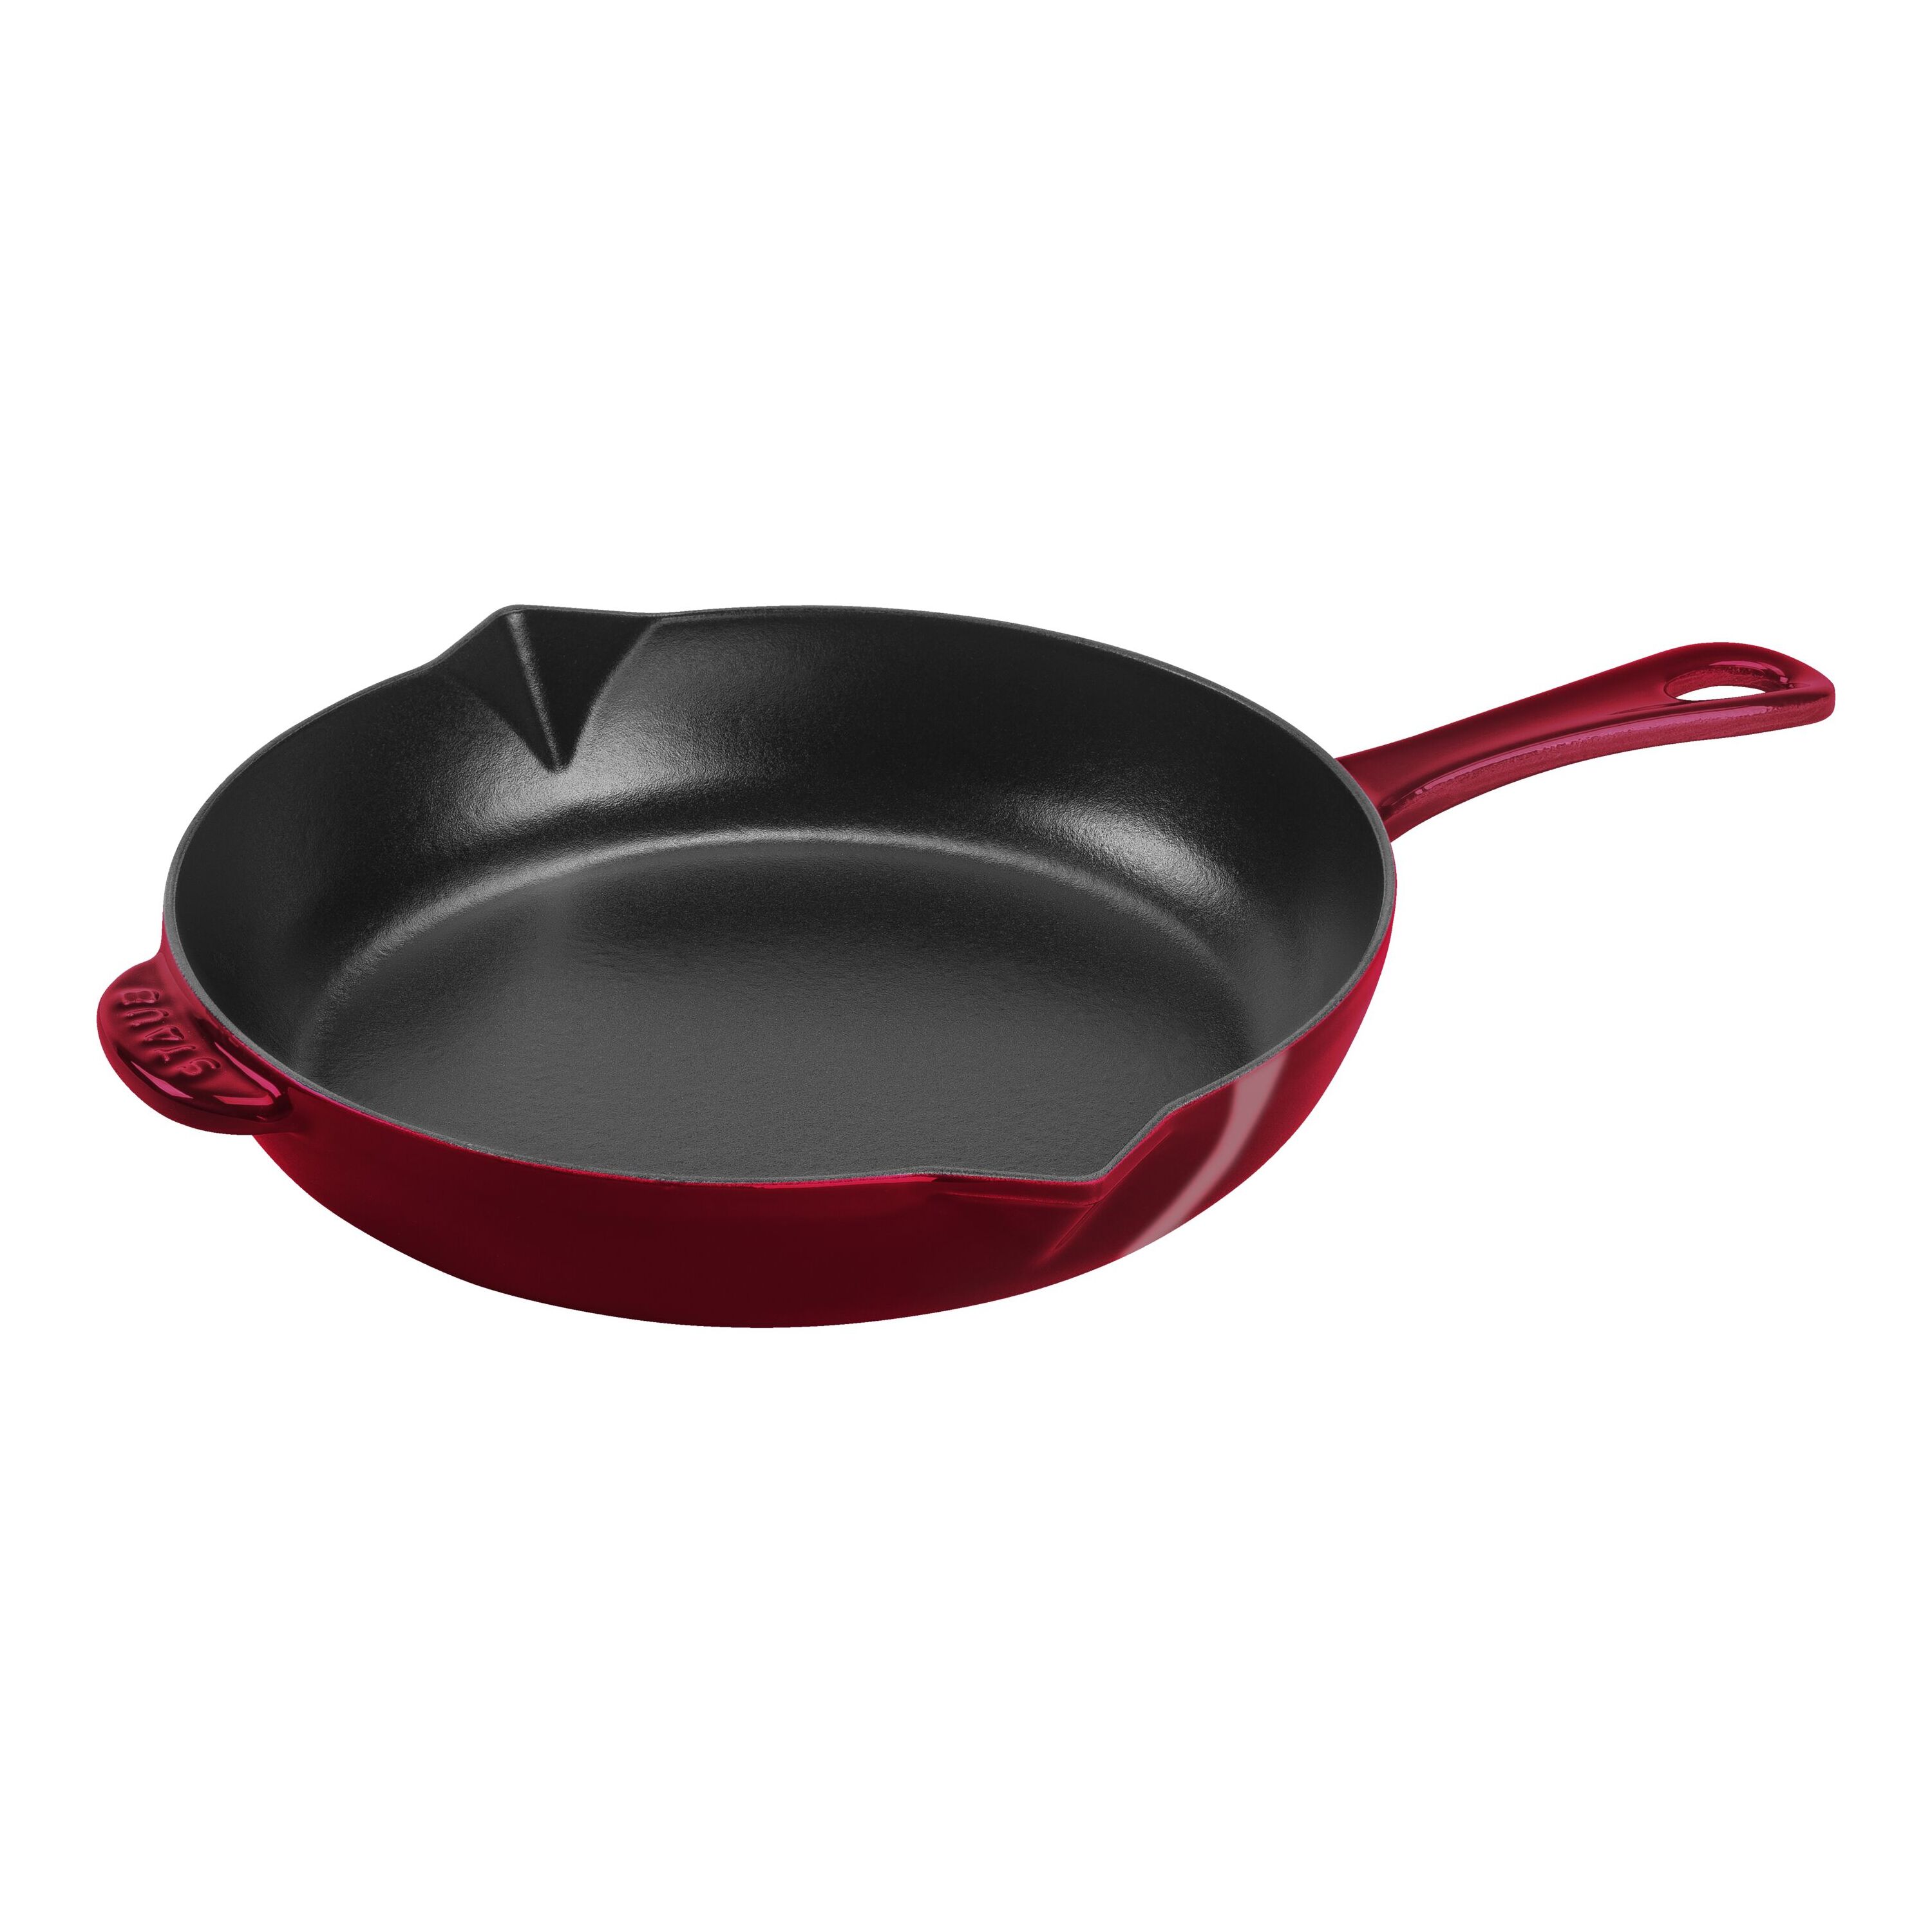 Buy Staub Pans Frying pan with pouring spout | ZWILLING.COM